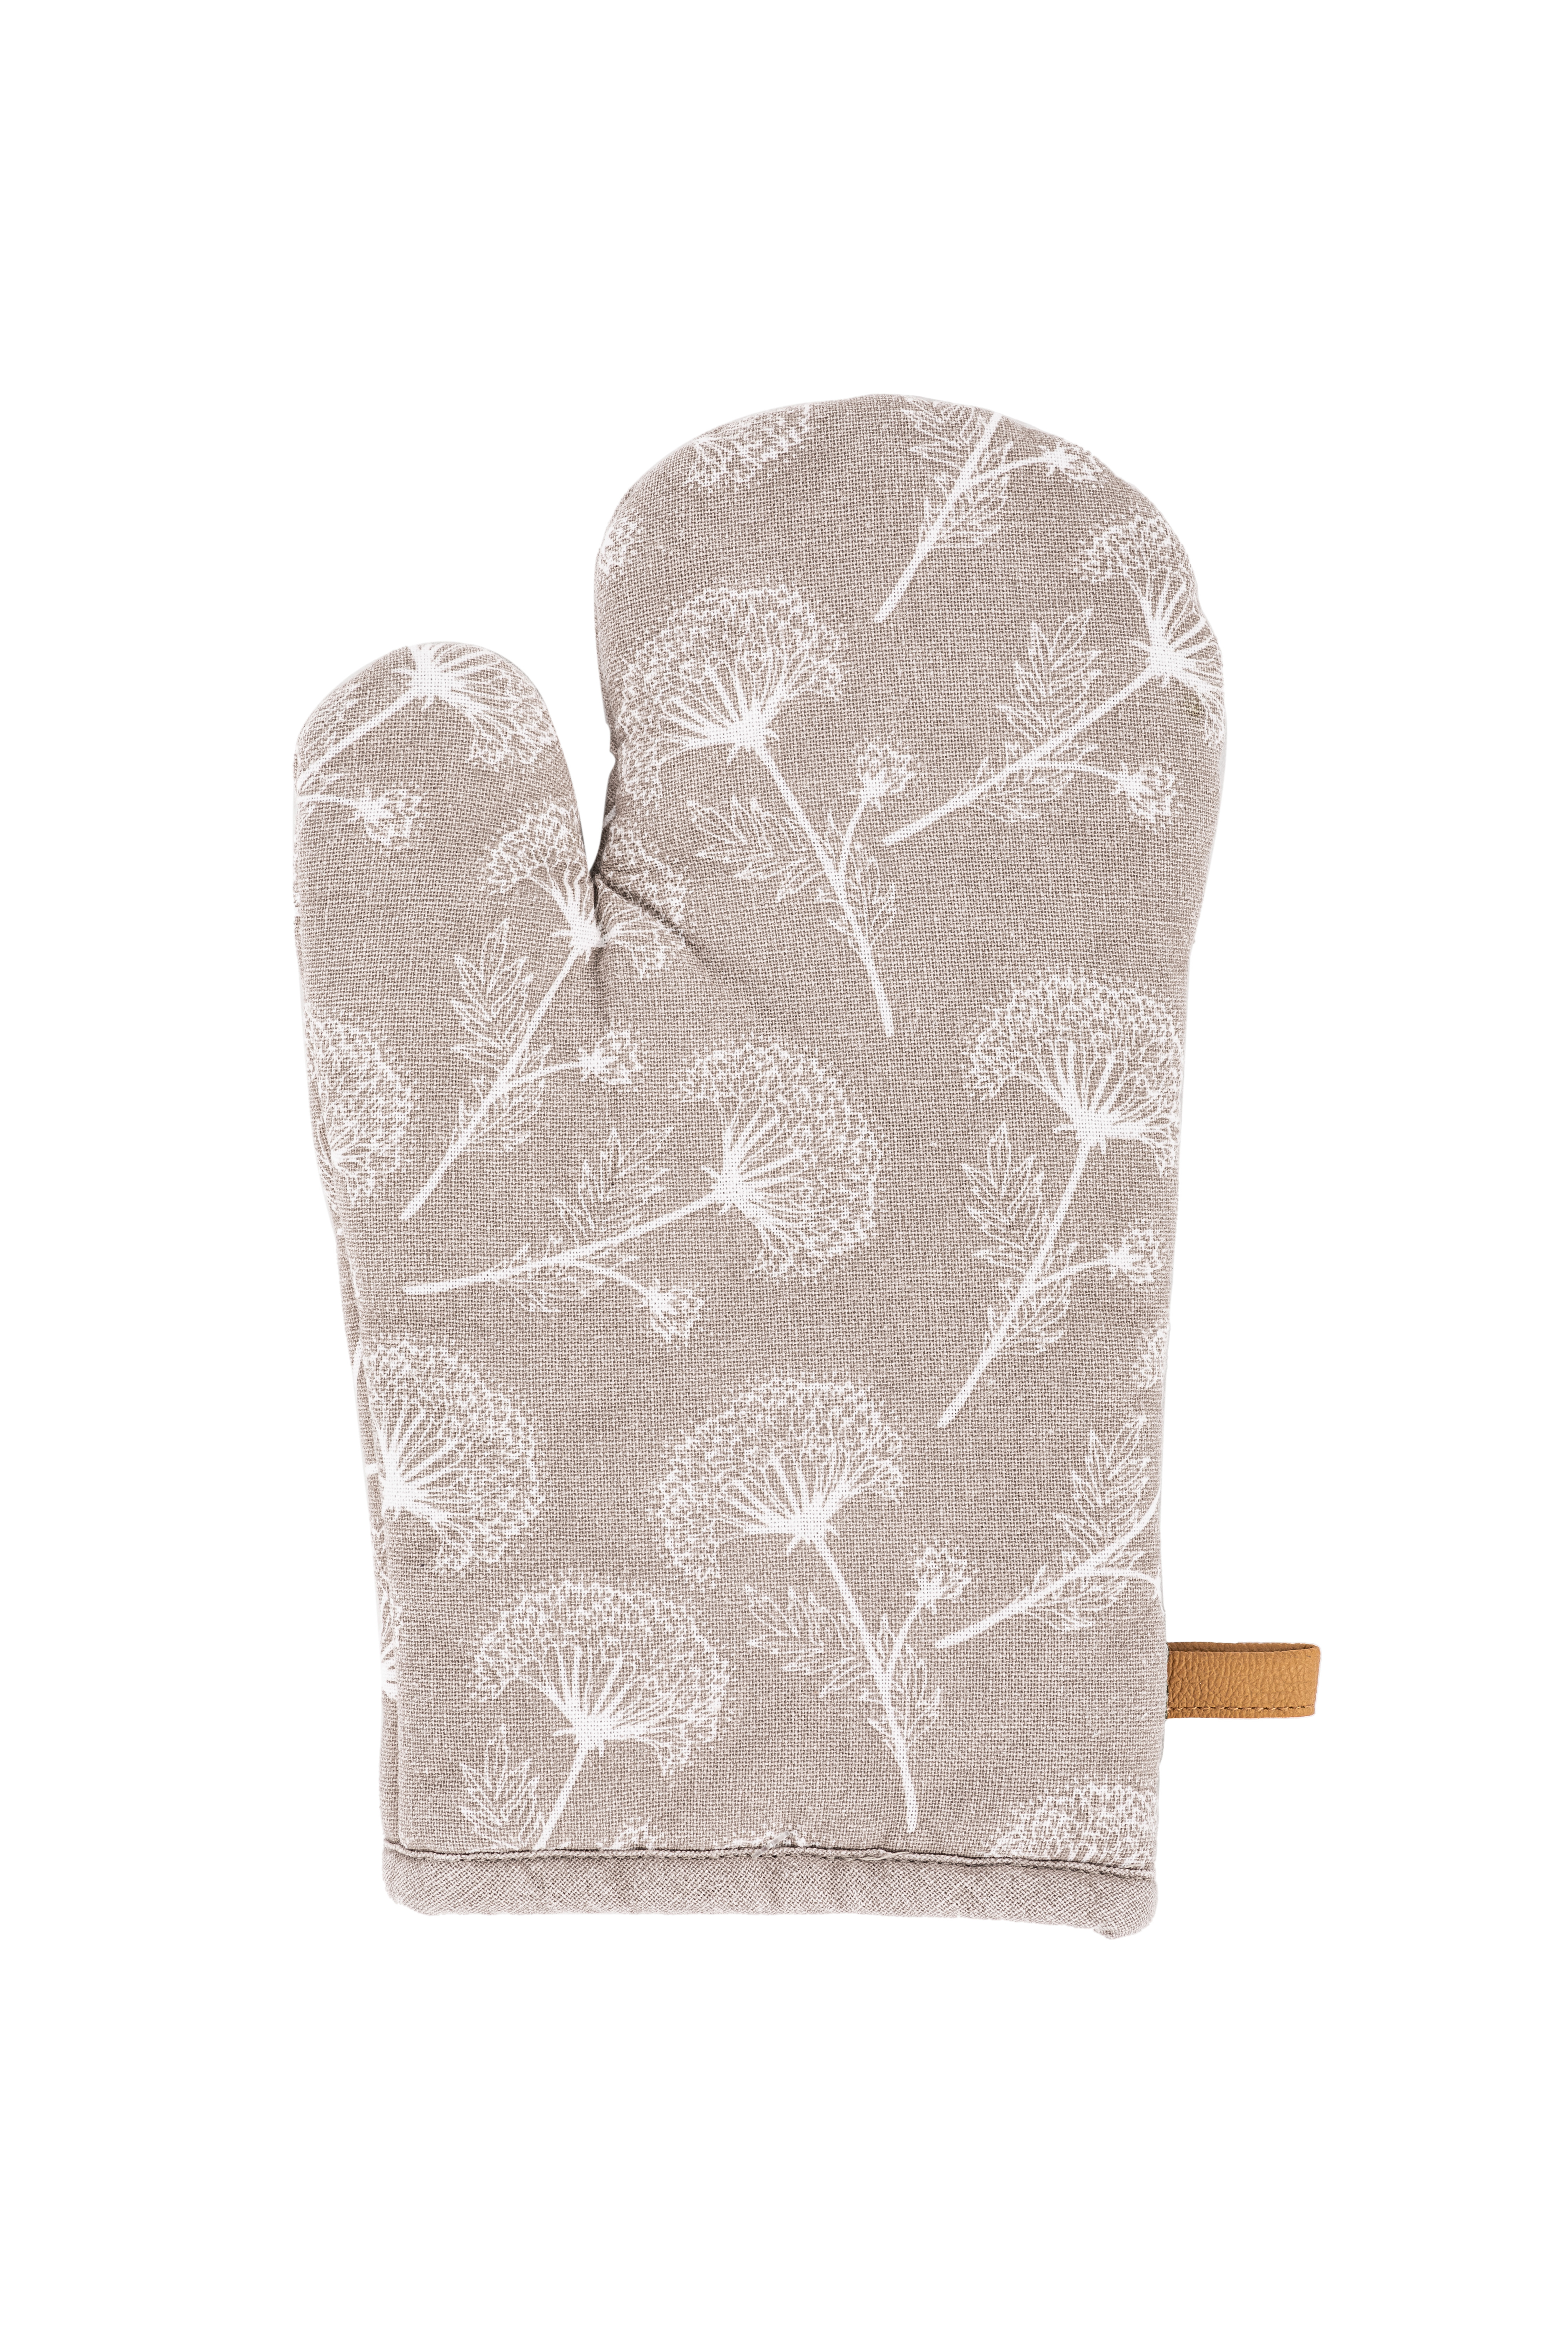 Ovenwant MYRNA, floral printed,18x28cm, taupe